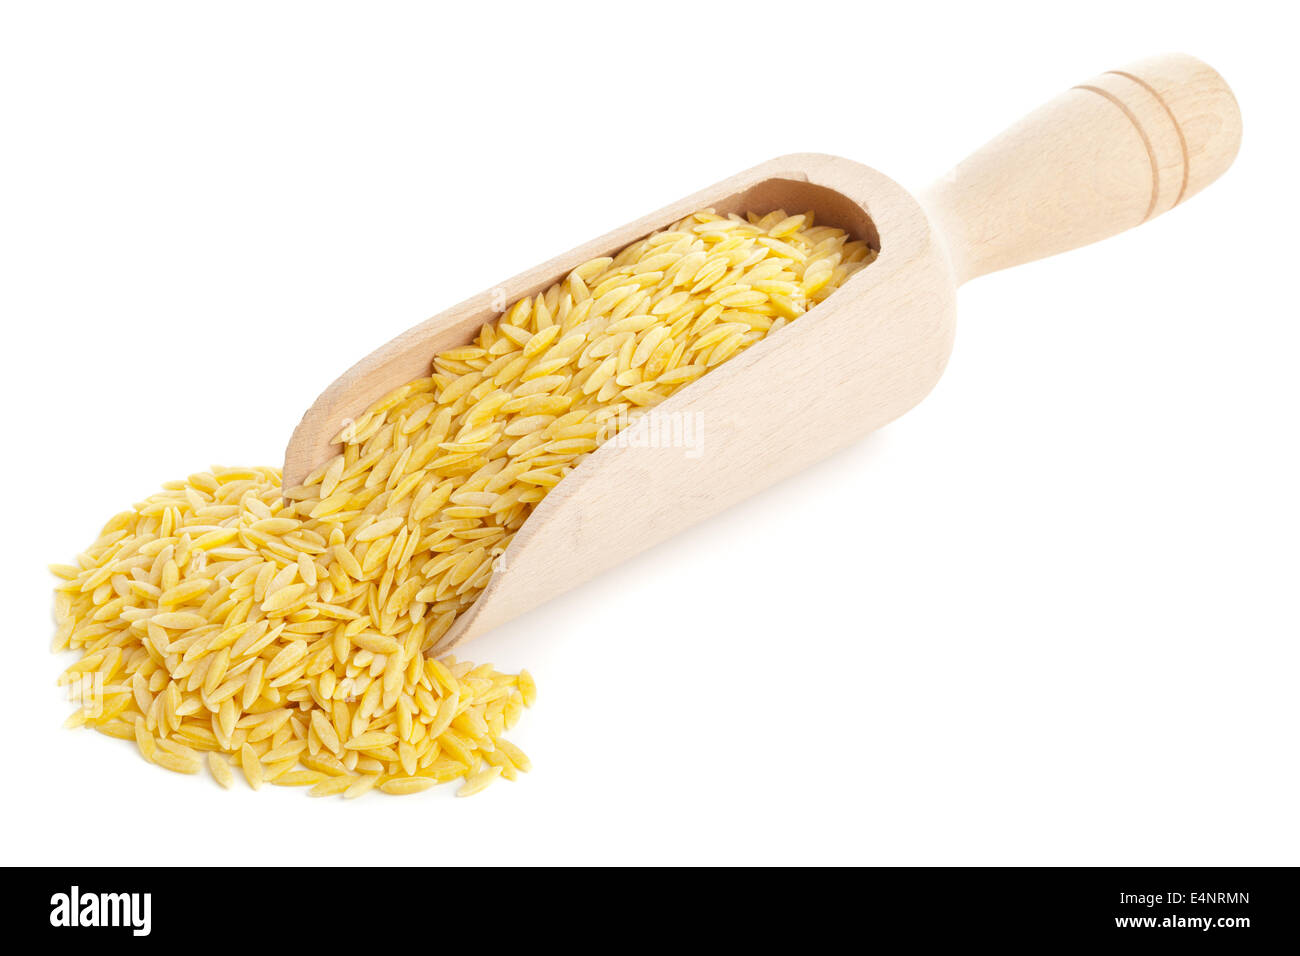 Durum wheat, also hard wheat or macaroni wheat, on wooden scoop over white background Stock Photo